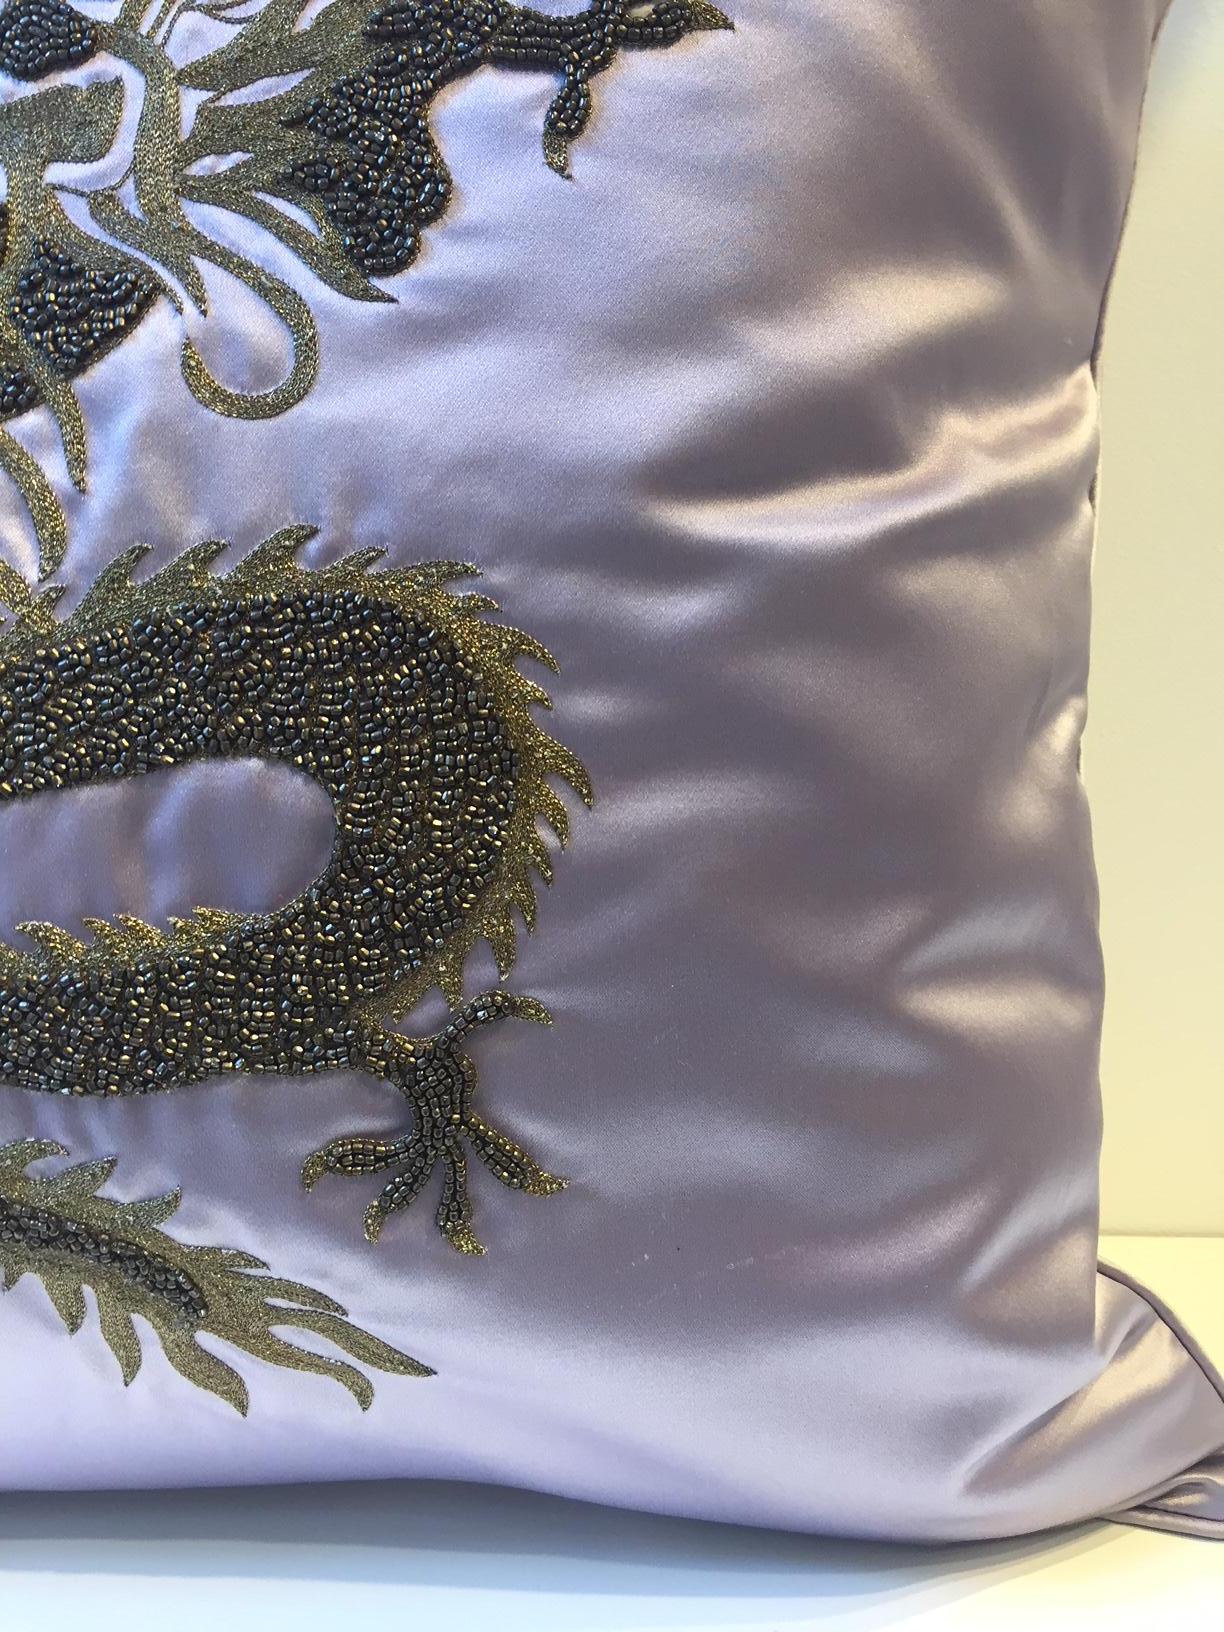 Cushion silk satin col. Lilac with dragon design hand embroidery gold thread and gold beads, cushion cover self piped, size 50cm x 50cm, cushion cover with cotton lining, feather inner 100% new goose feathers, 2 little marks on fabric on the back